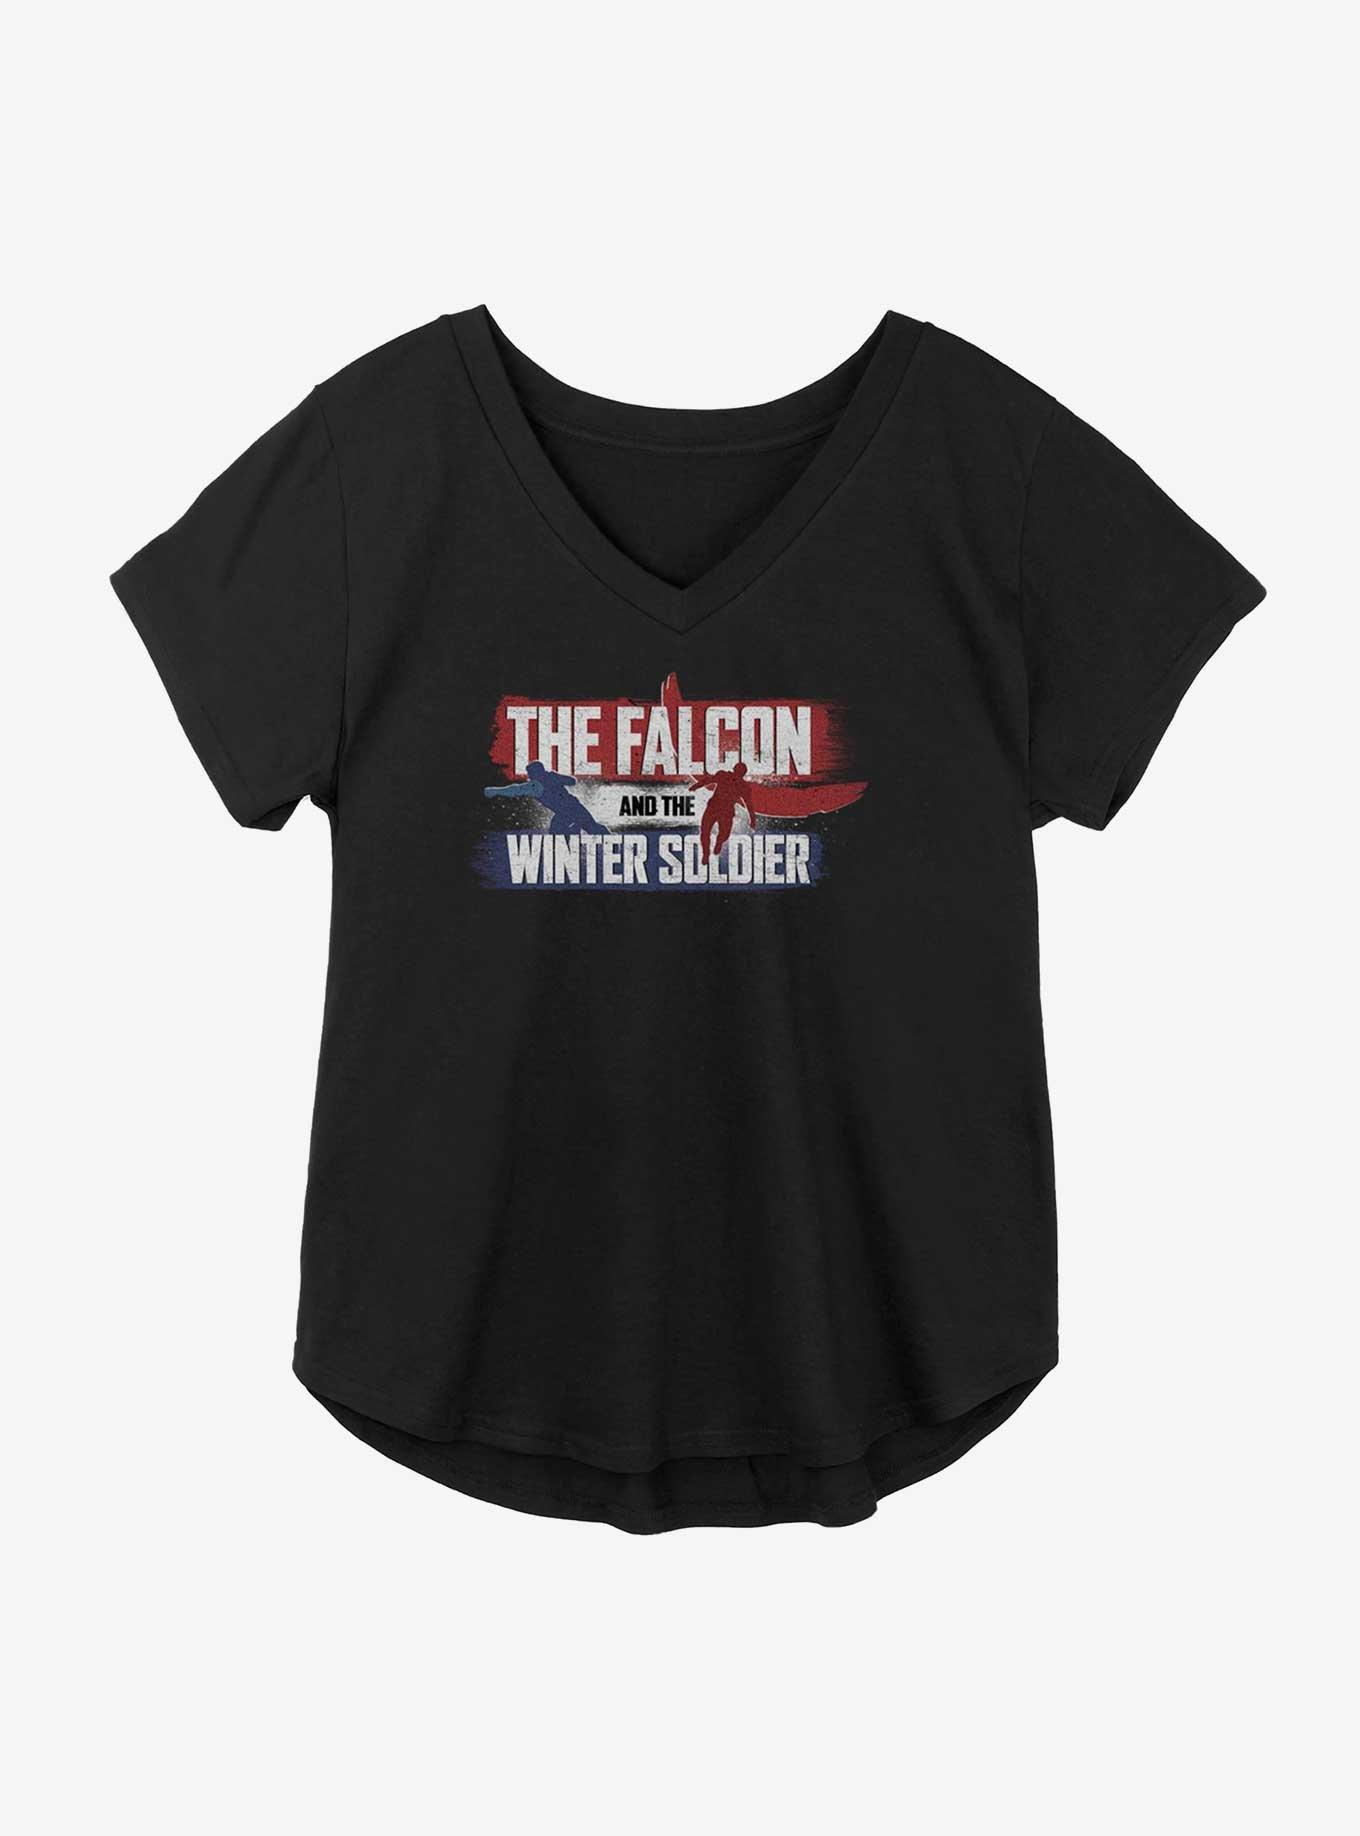 Marvel The Falcon And The Winter Soldier Spray Logo Girls Plus Size T-Shirt, BLACK, hi-res